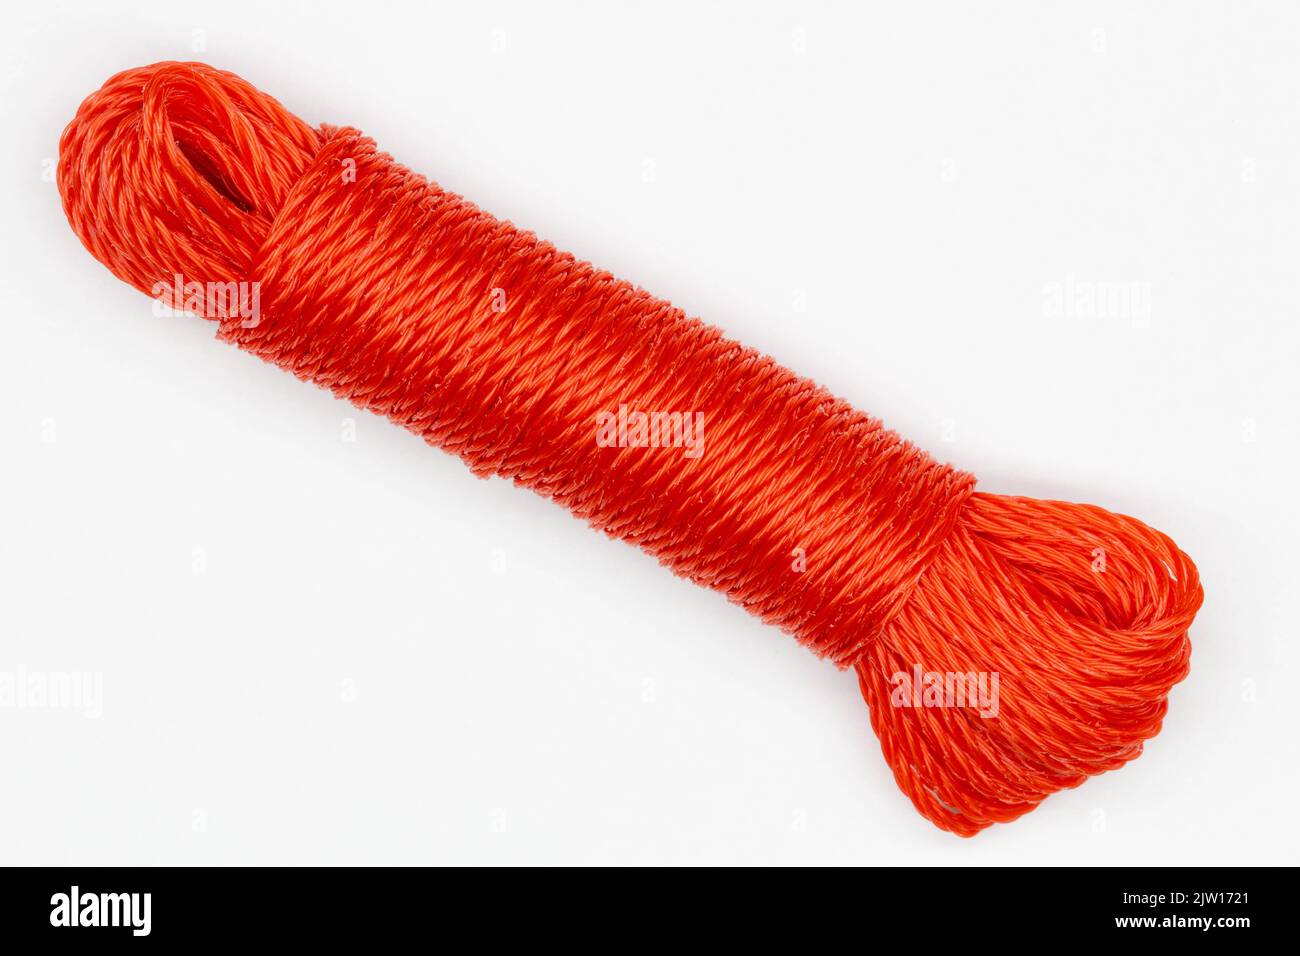 Bow of Red White String, Twine Rope isolated on white., Stock image